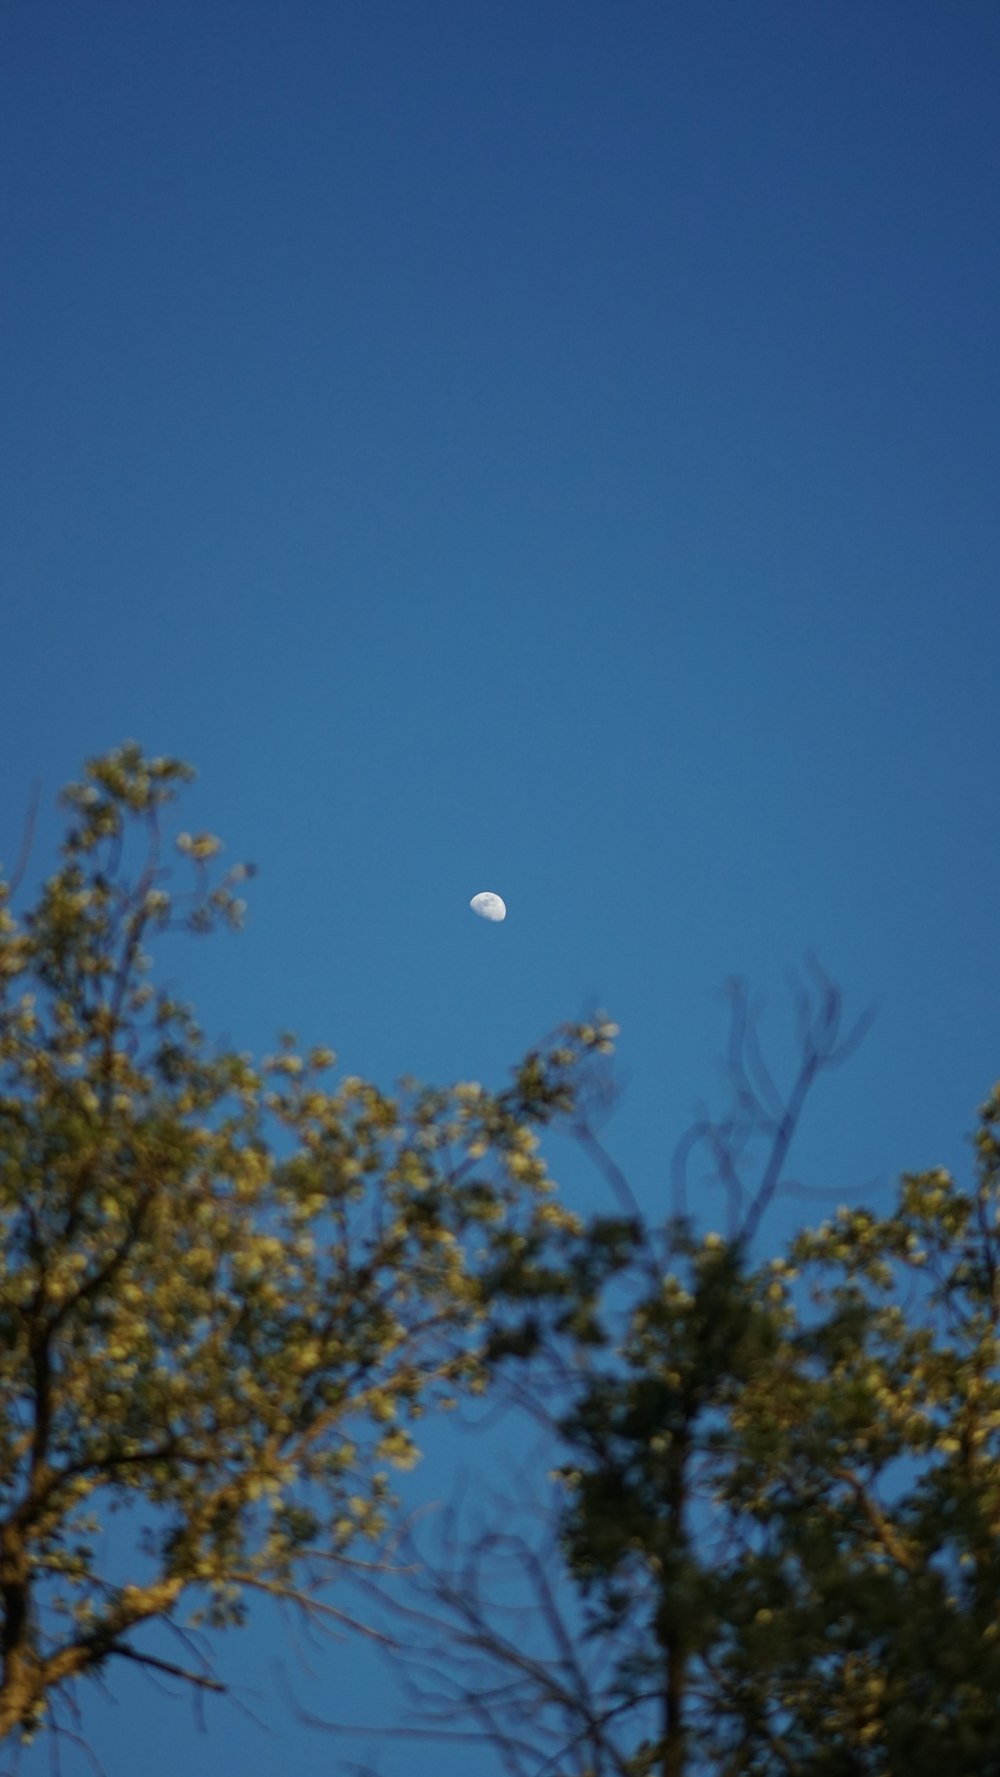 a half moon is seen through the trees